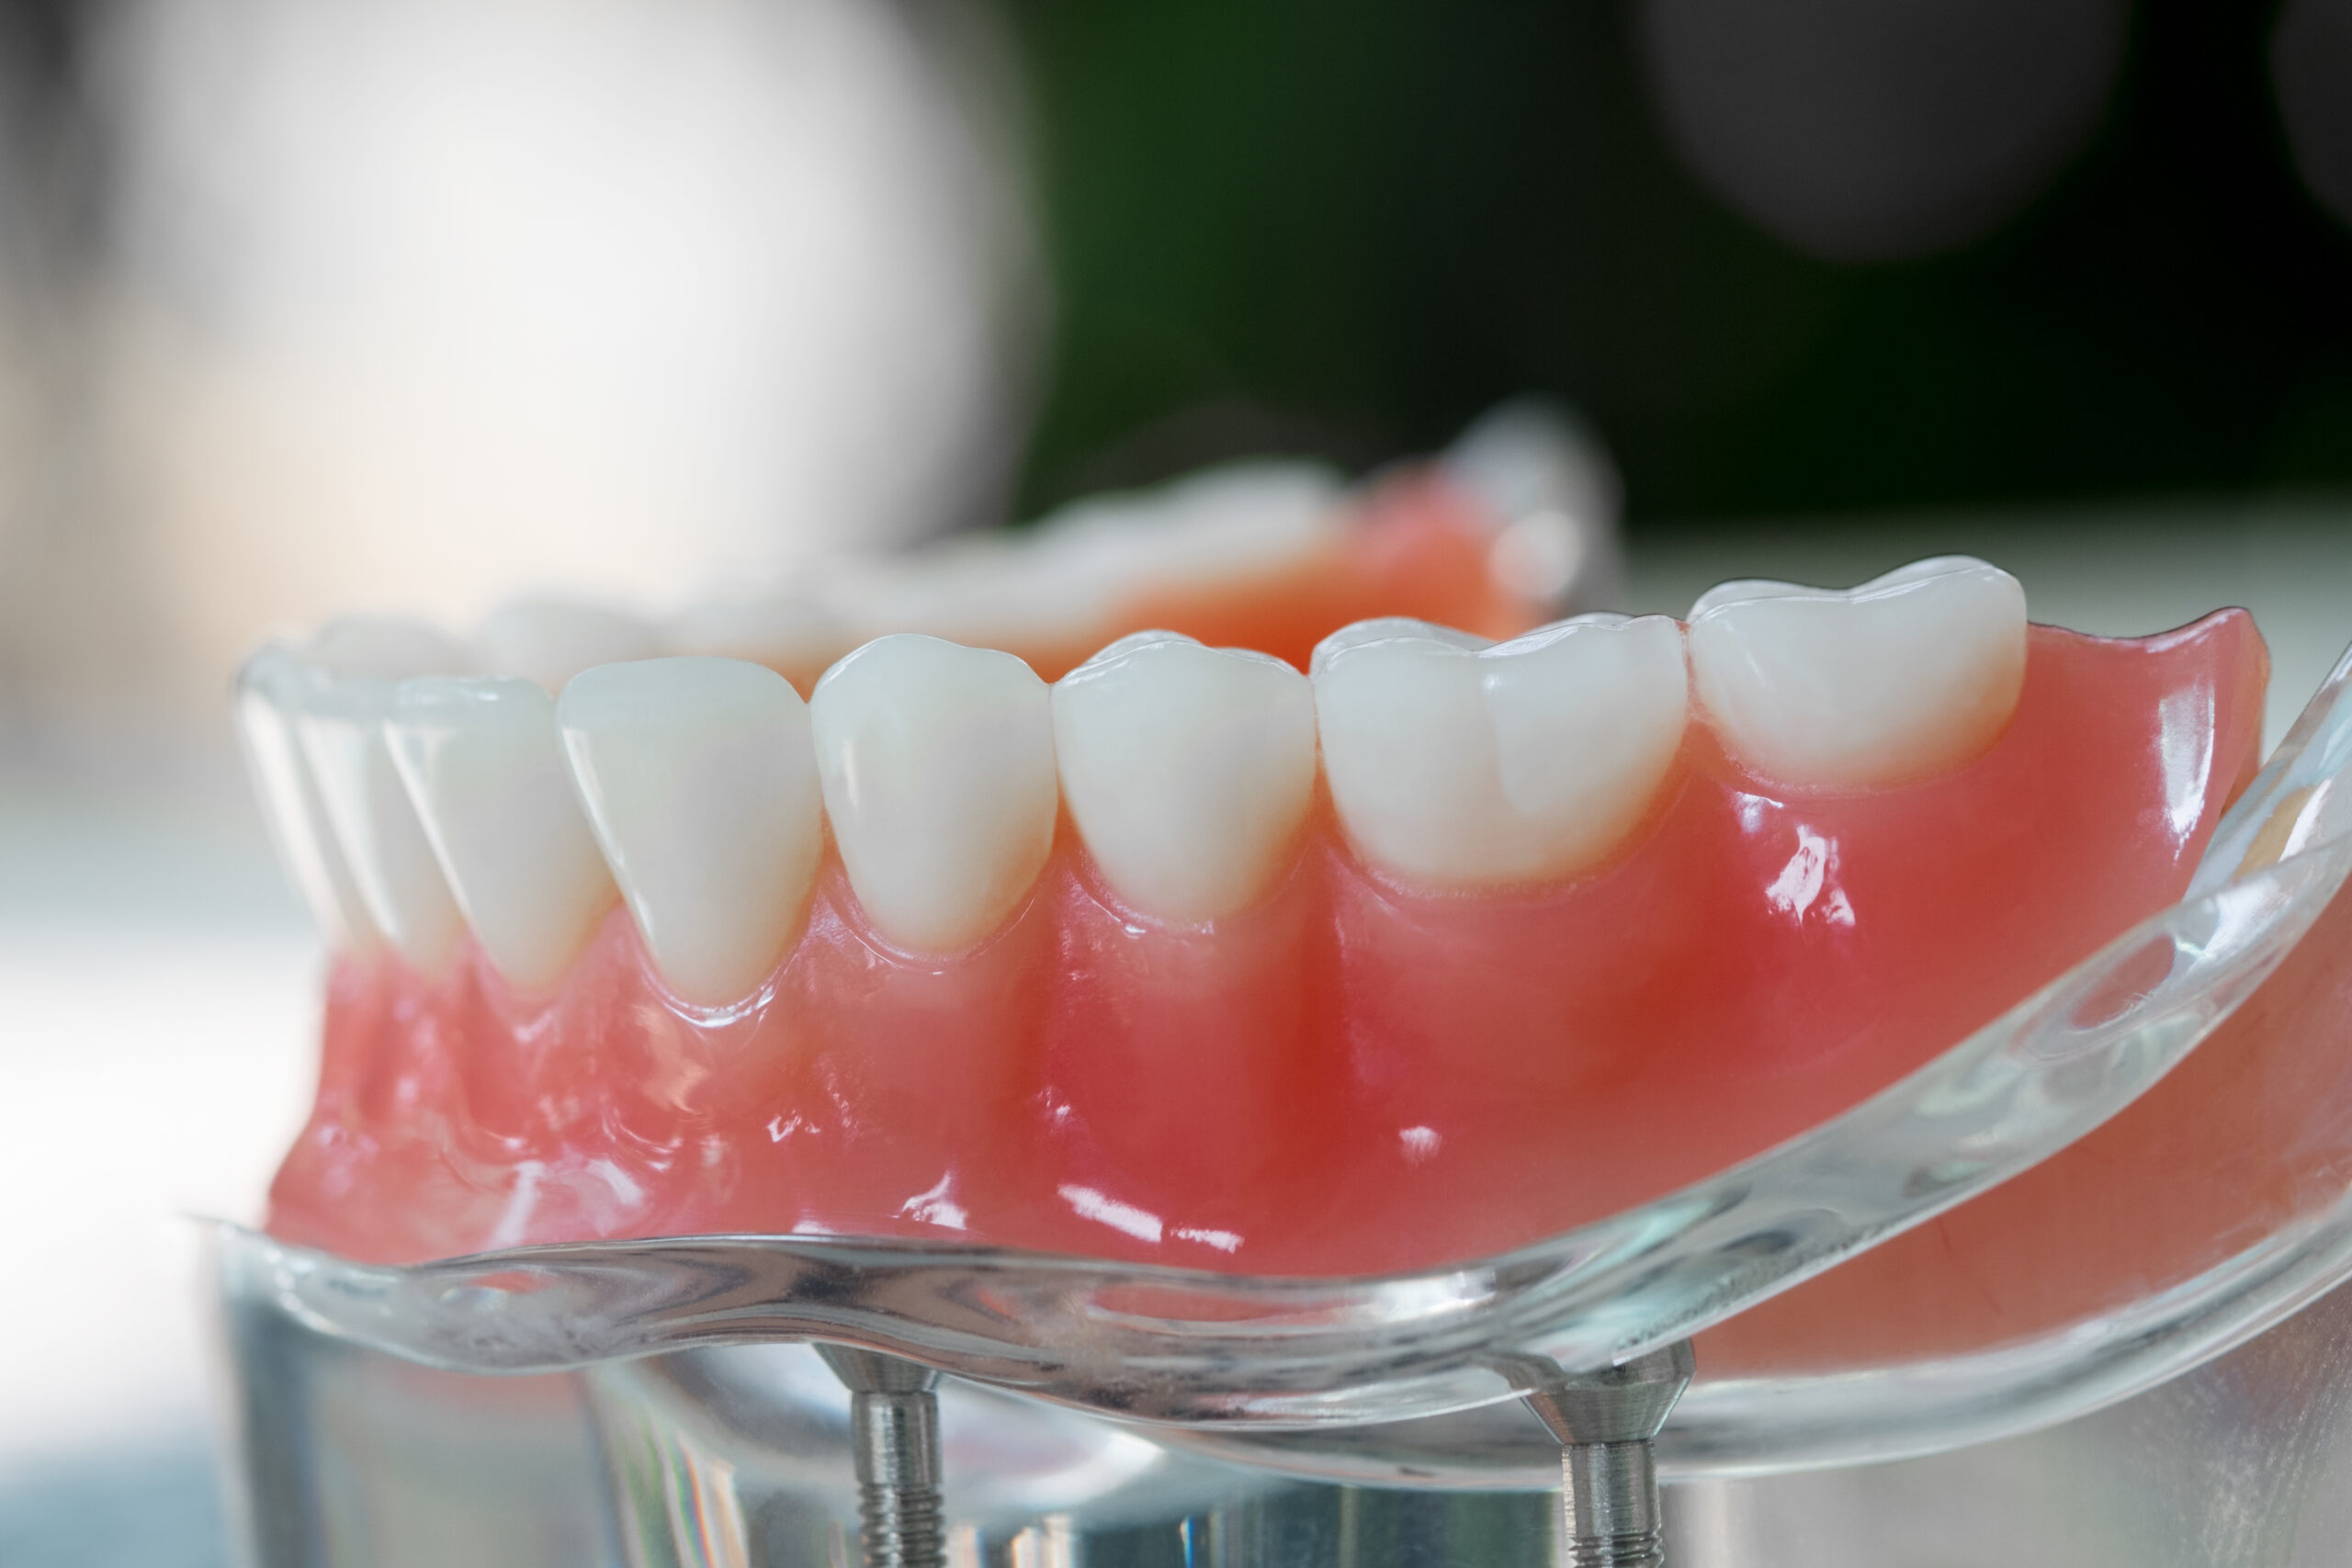 Ready To Improve Your Smile With A Zirconia Fixed Bridge In Oregon City, OR?